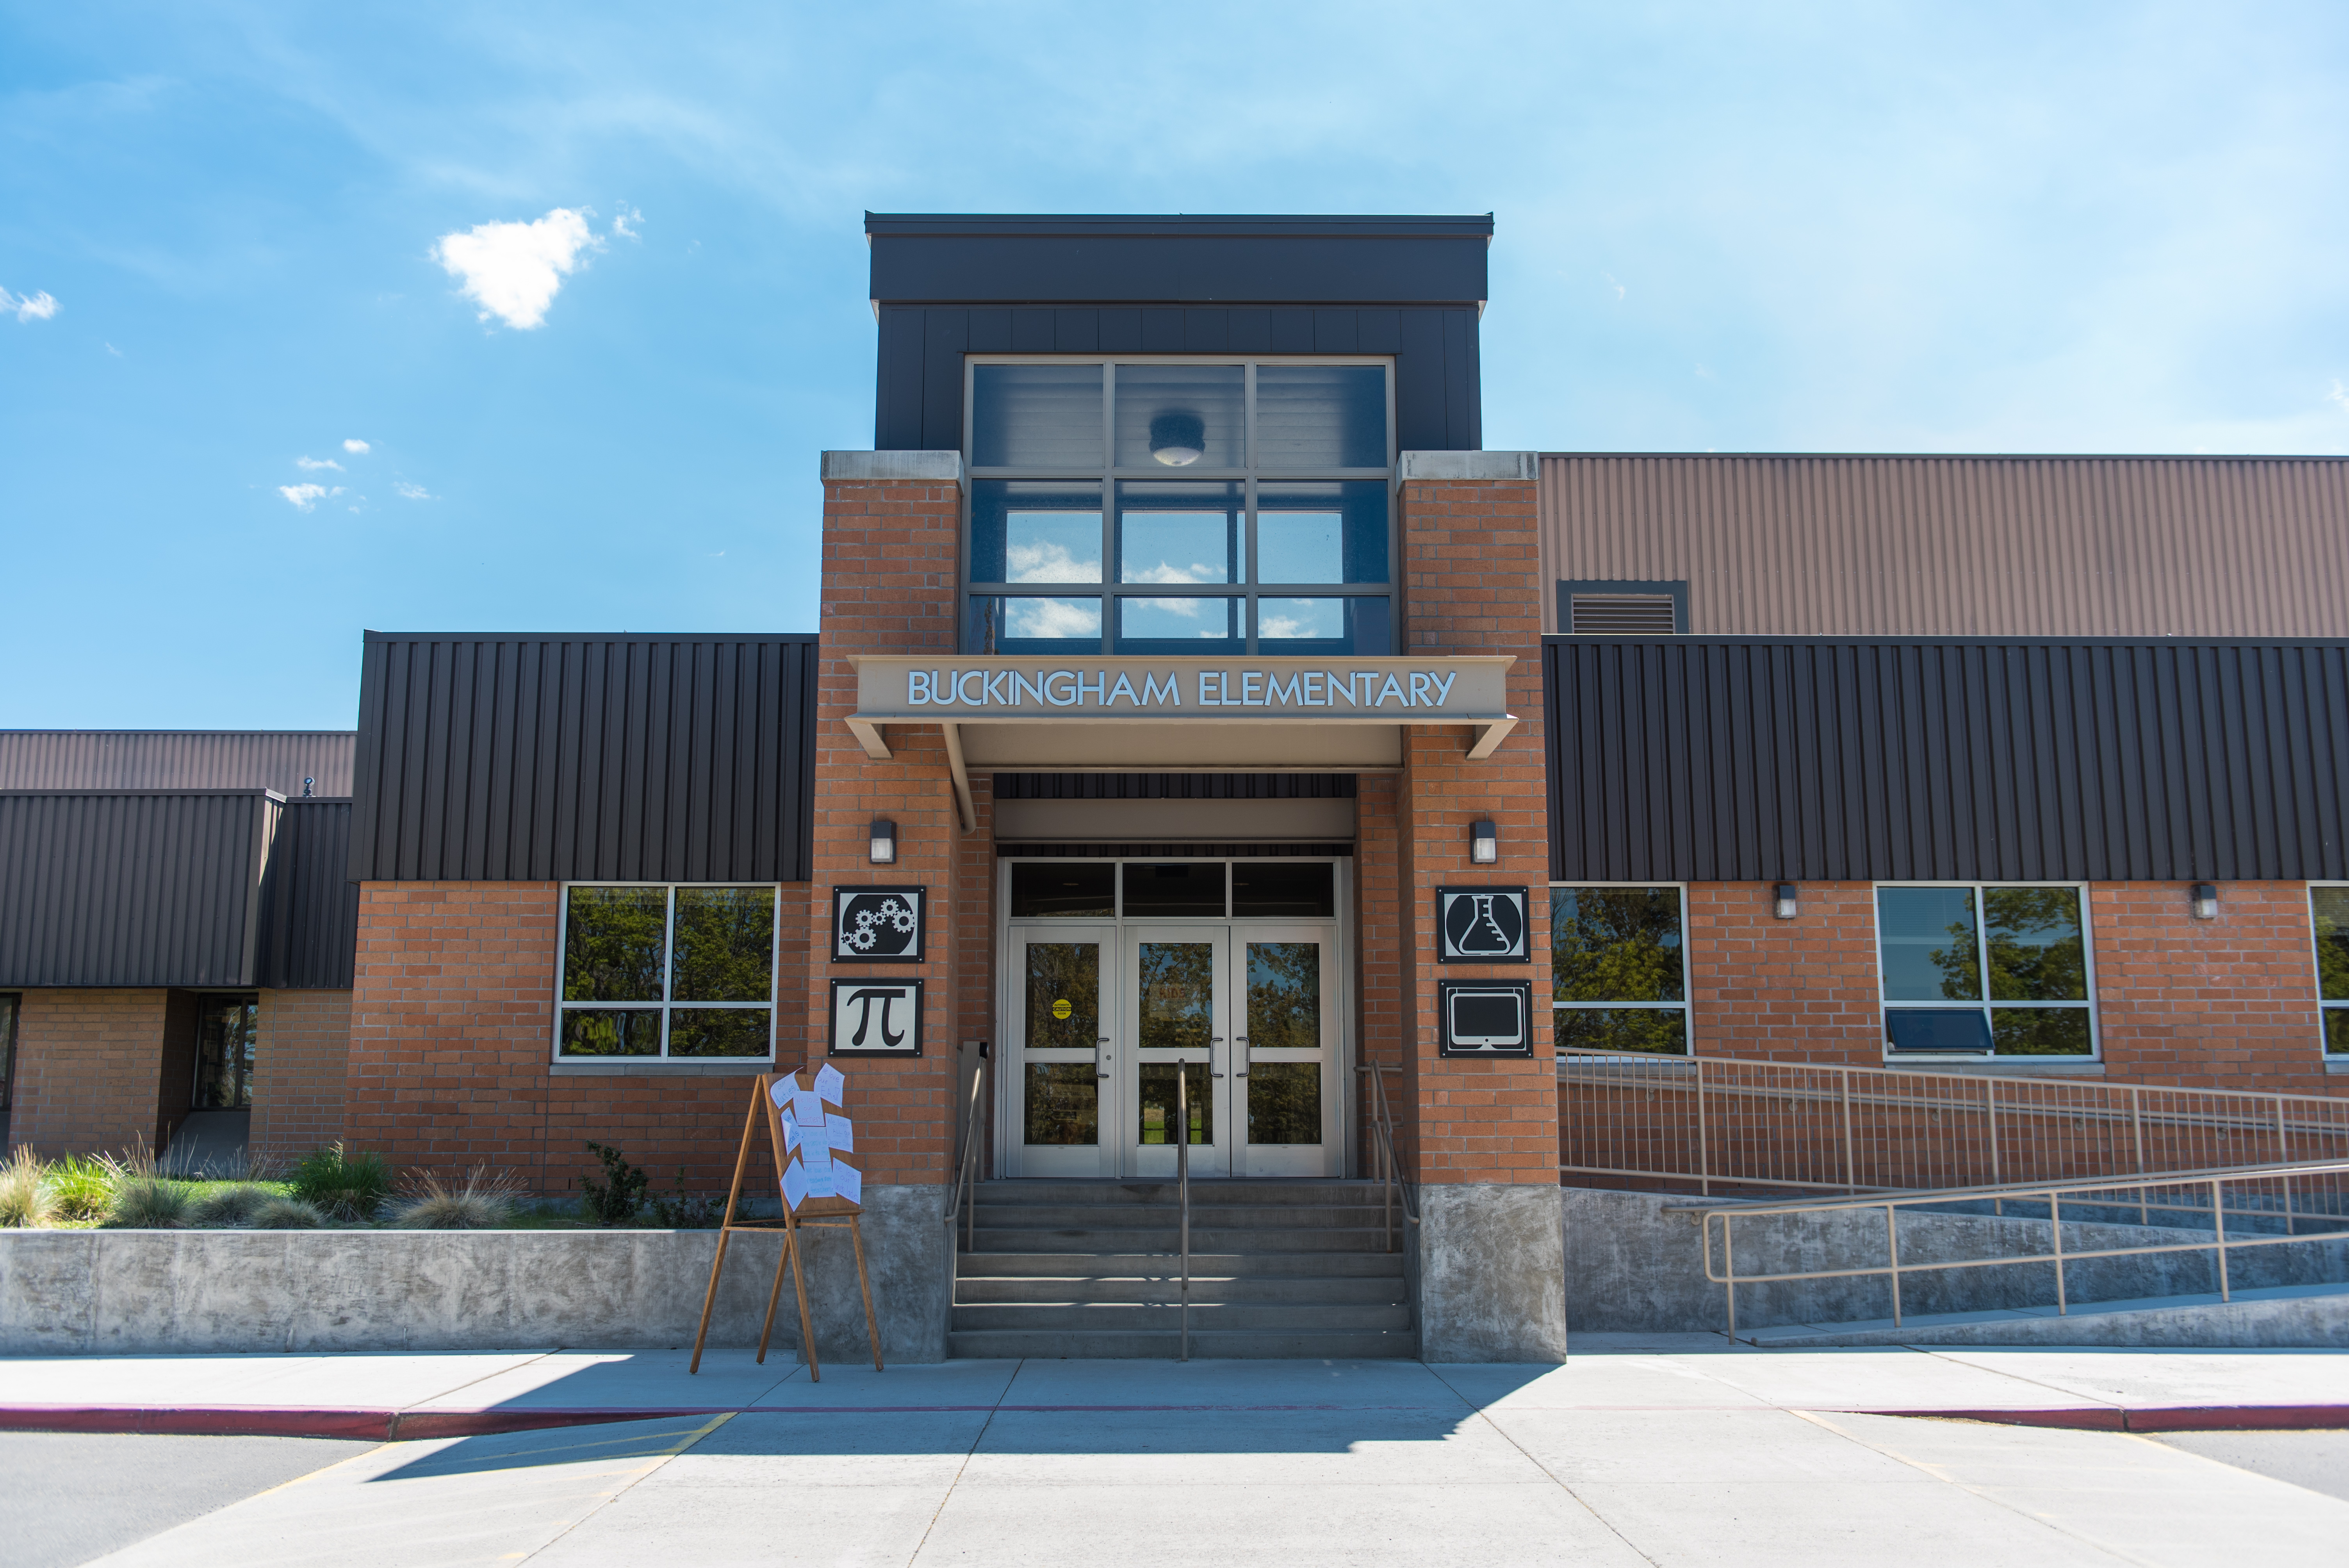 School entrance of single level school with two stories of windows in entryway. Words Buckingham Elementary are over the entrance in silver letters and blue sky is above.